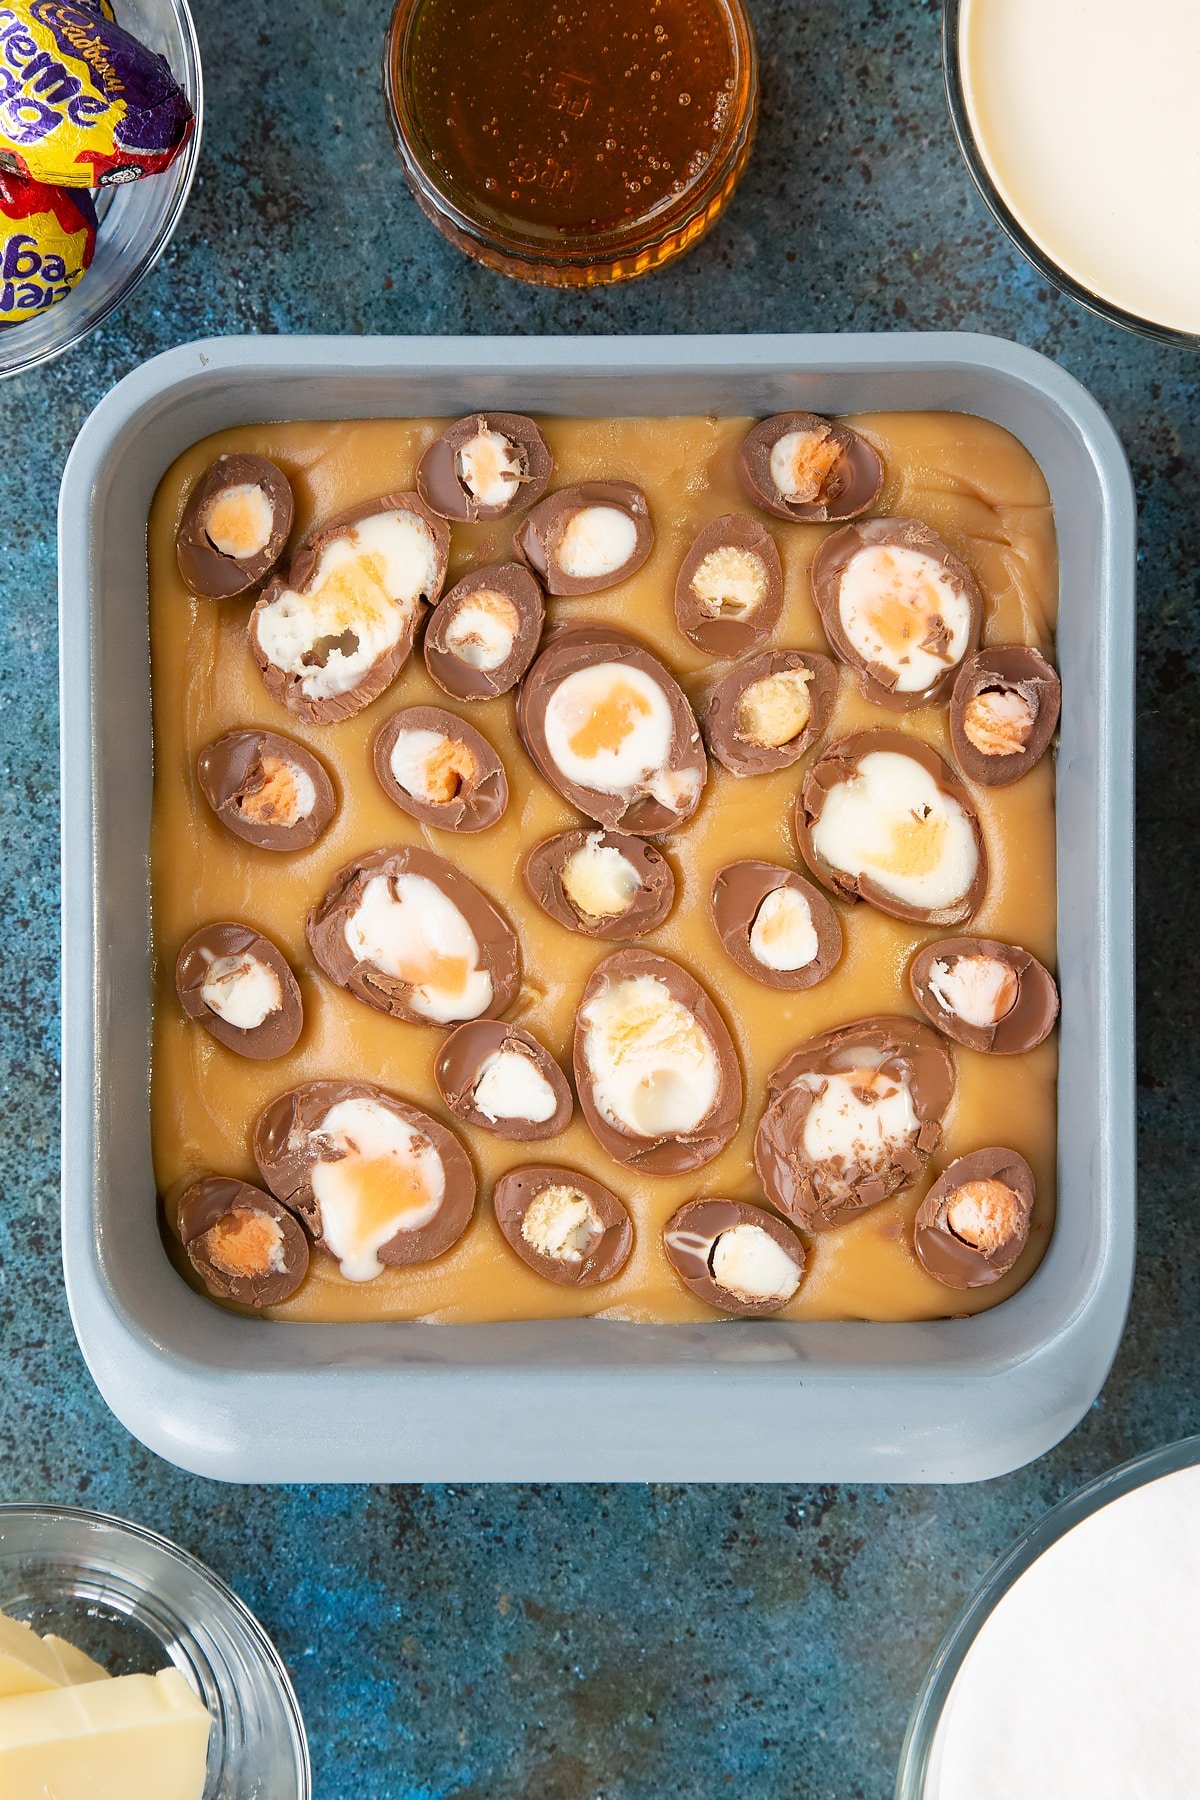 Adding sliced creme eggs onto the top layer of the fudge inside a baking tray.